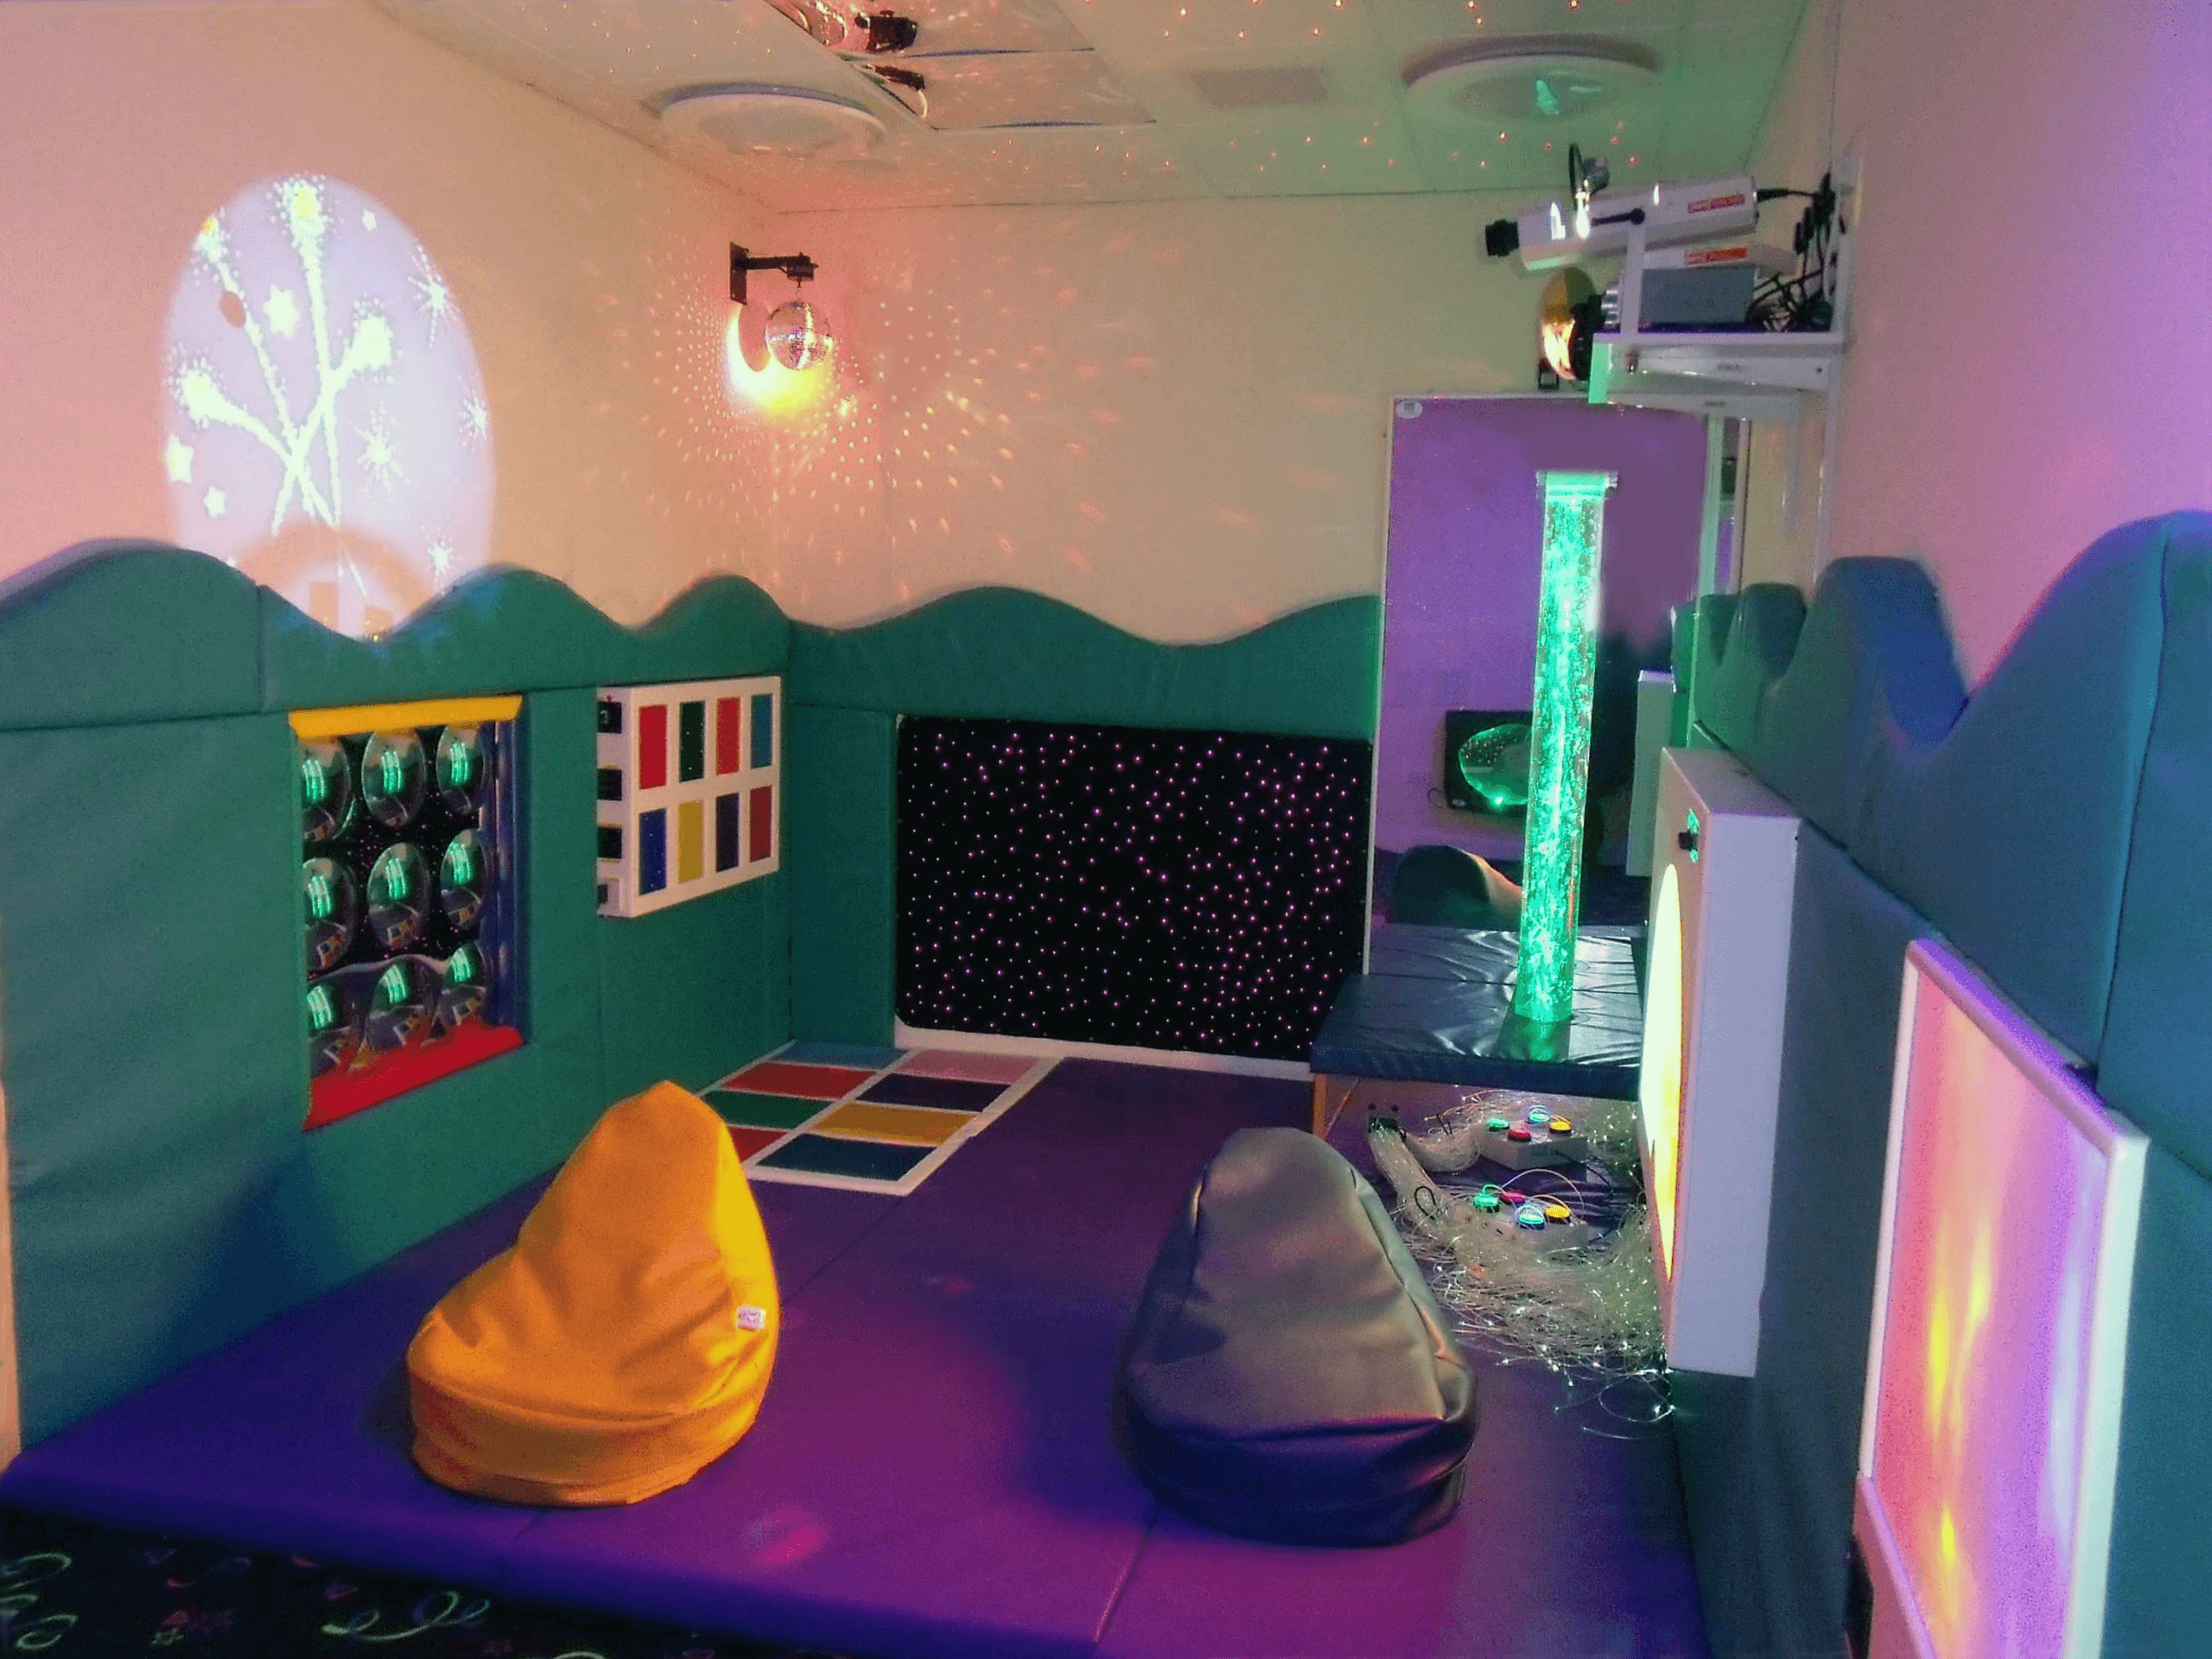 How to Build an Amazing Sensory Room